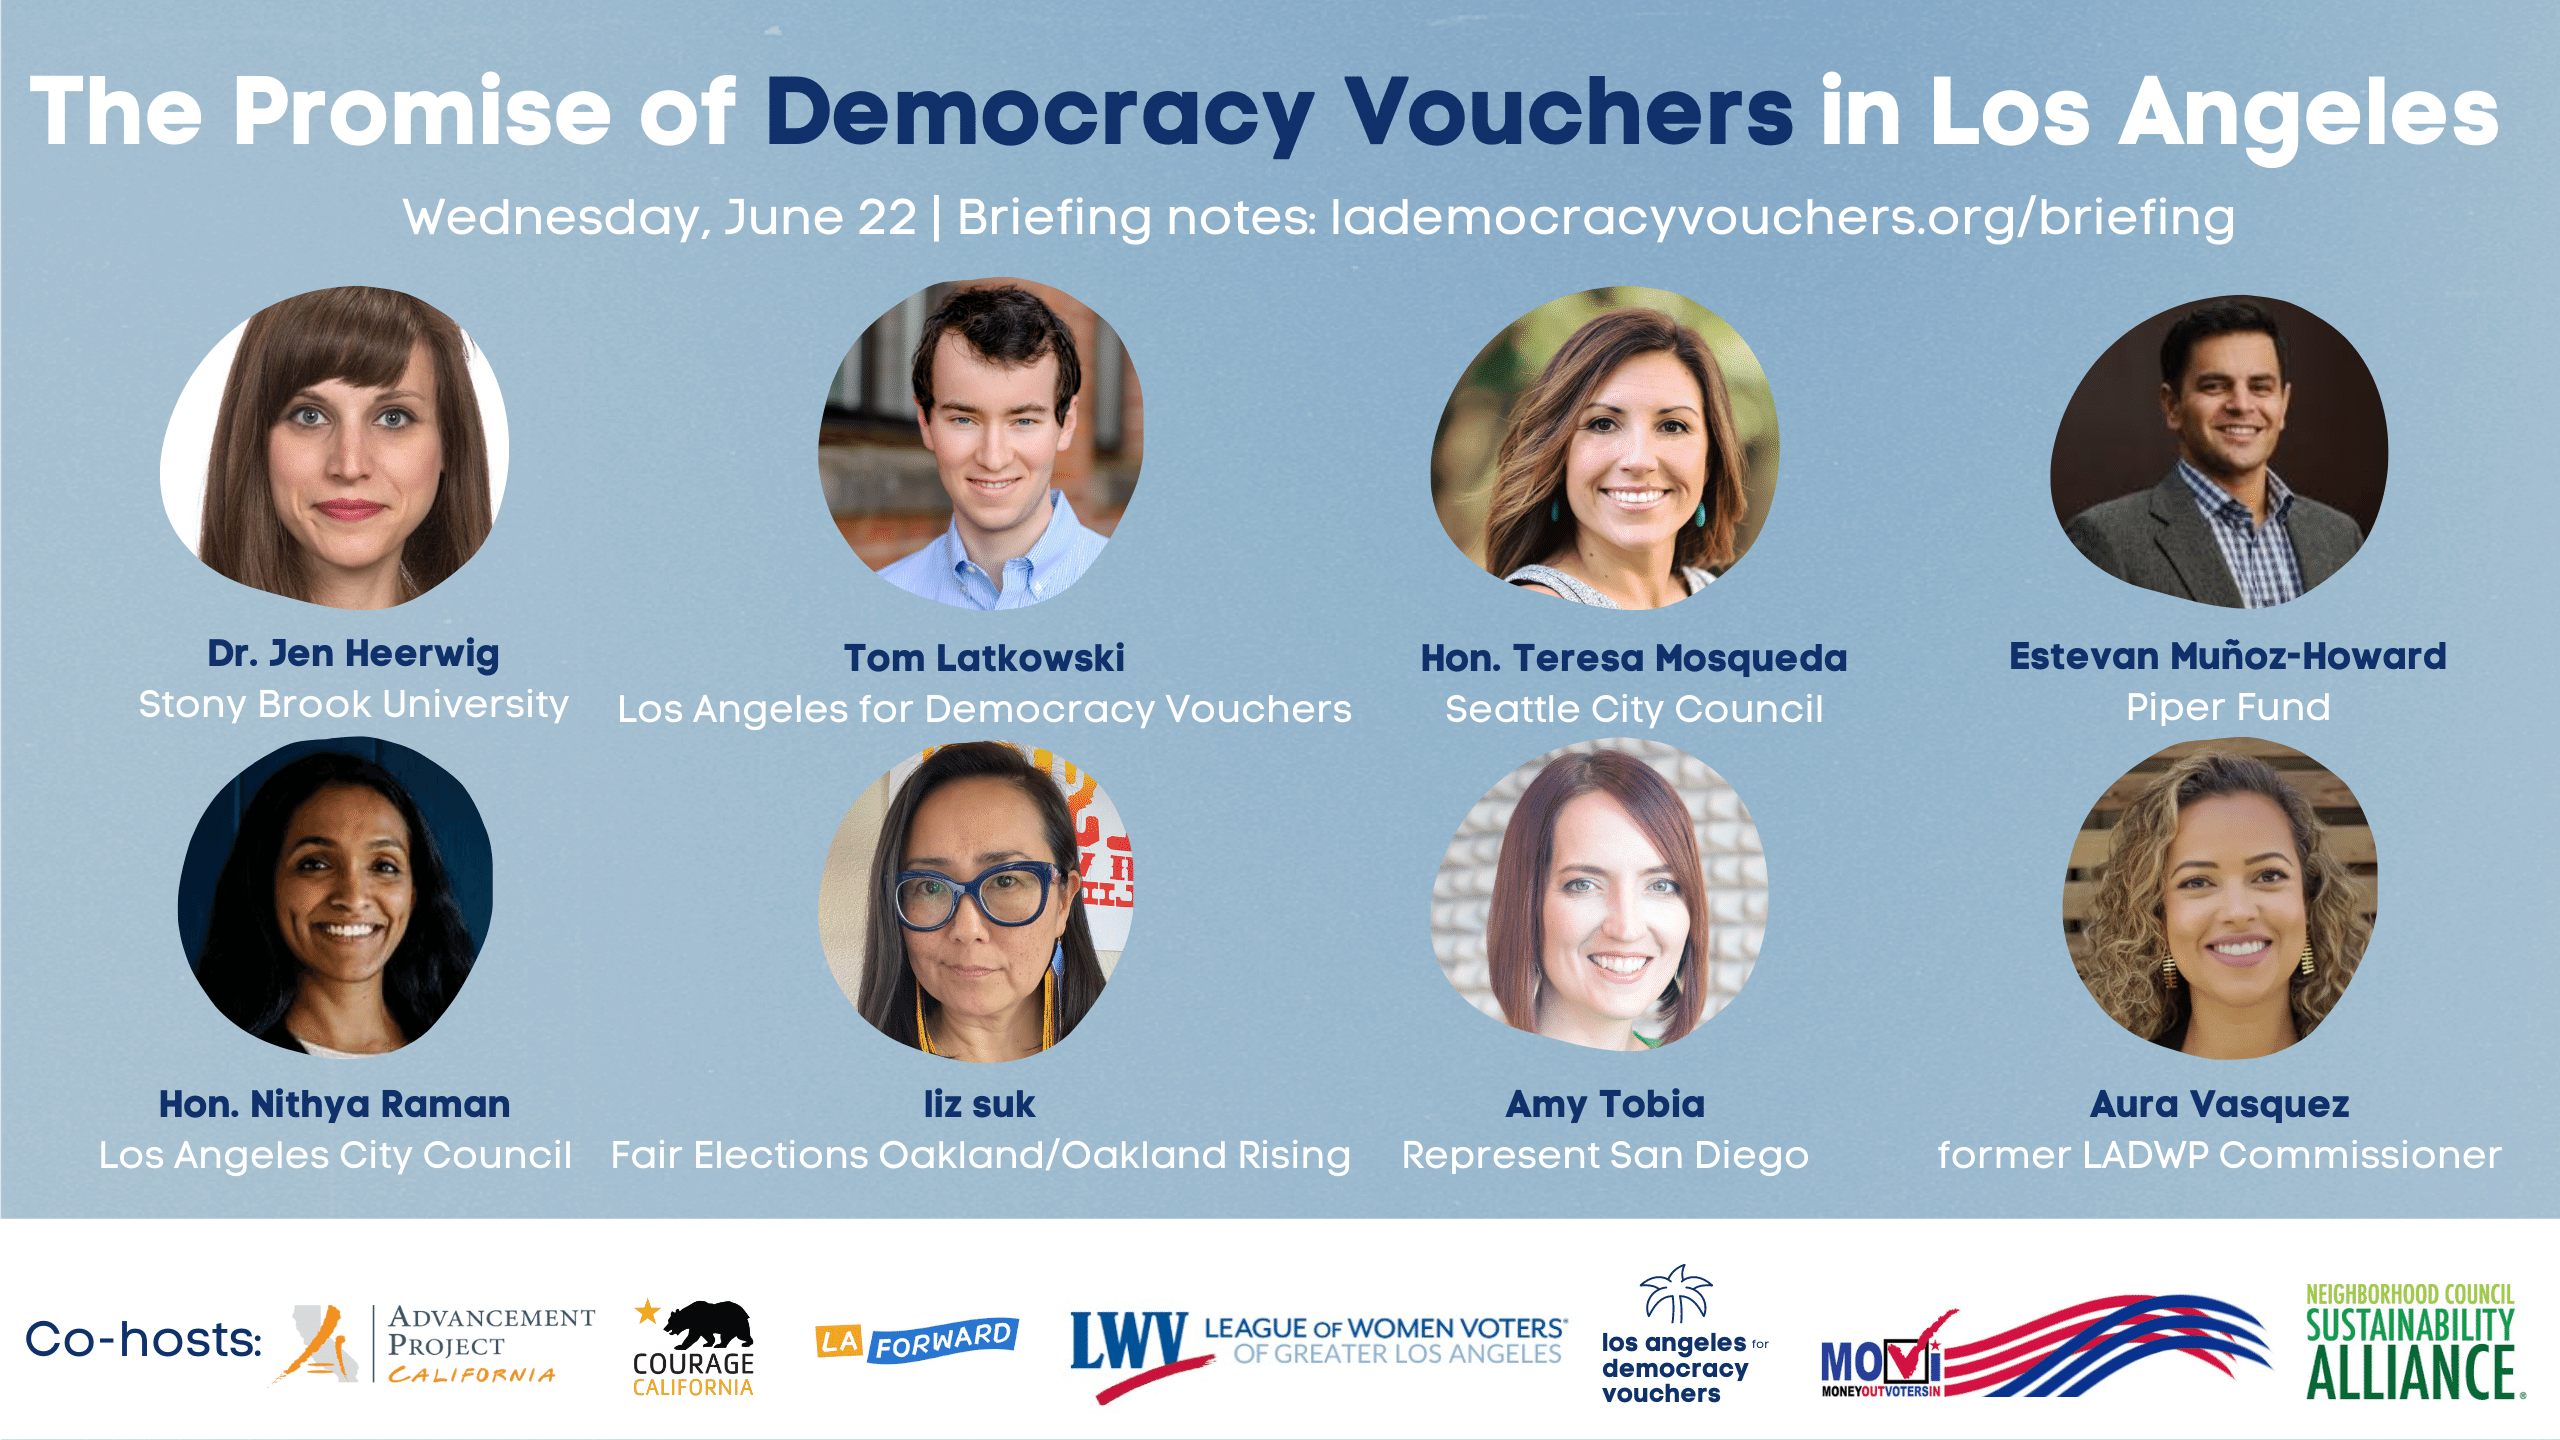 The Promise of Democracy Vouchers in Los Angeles: Video and Notes